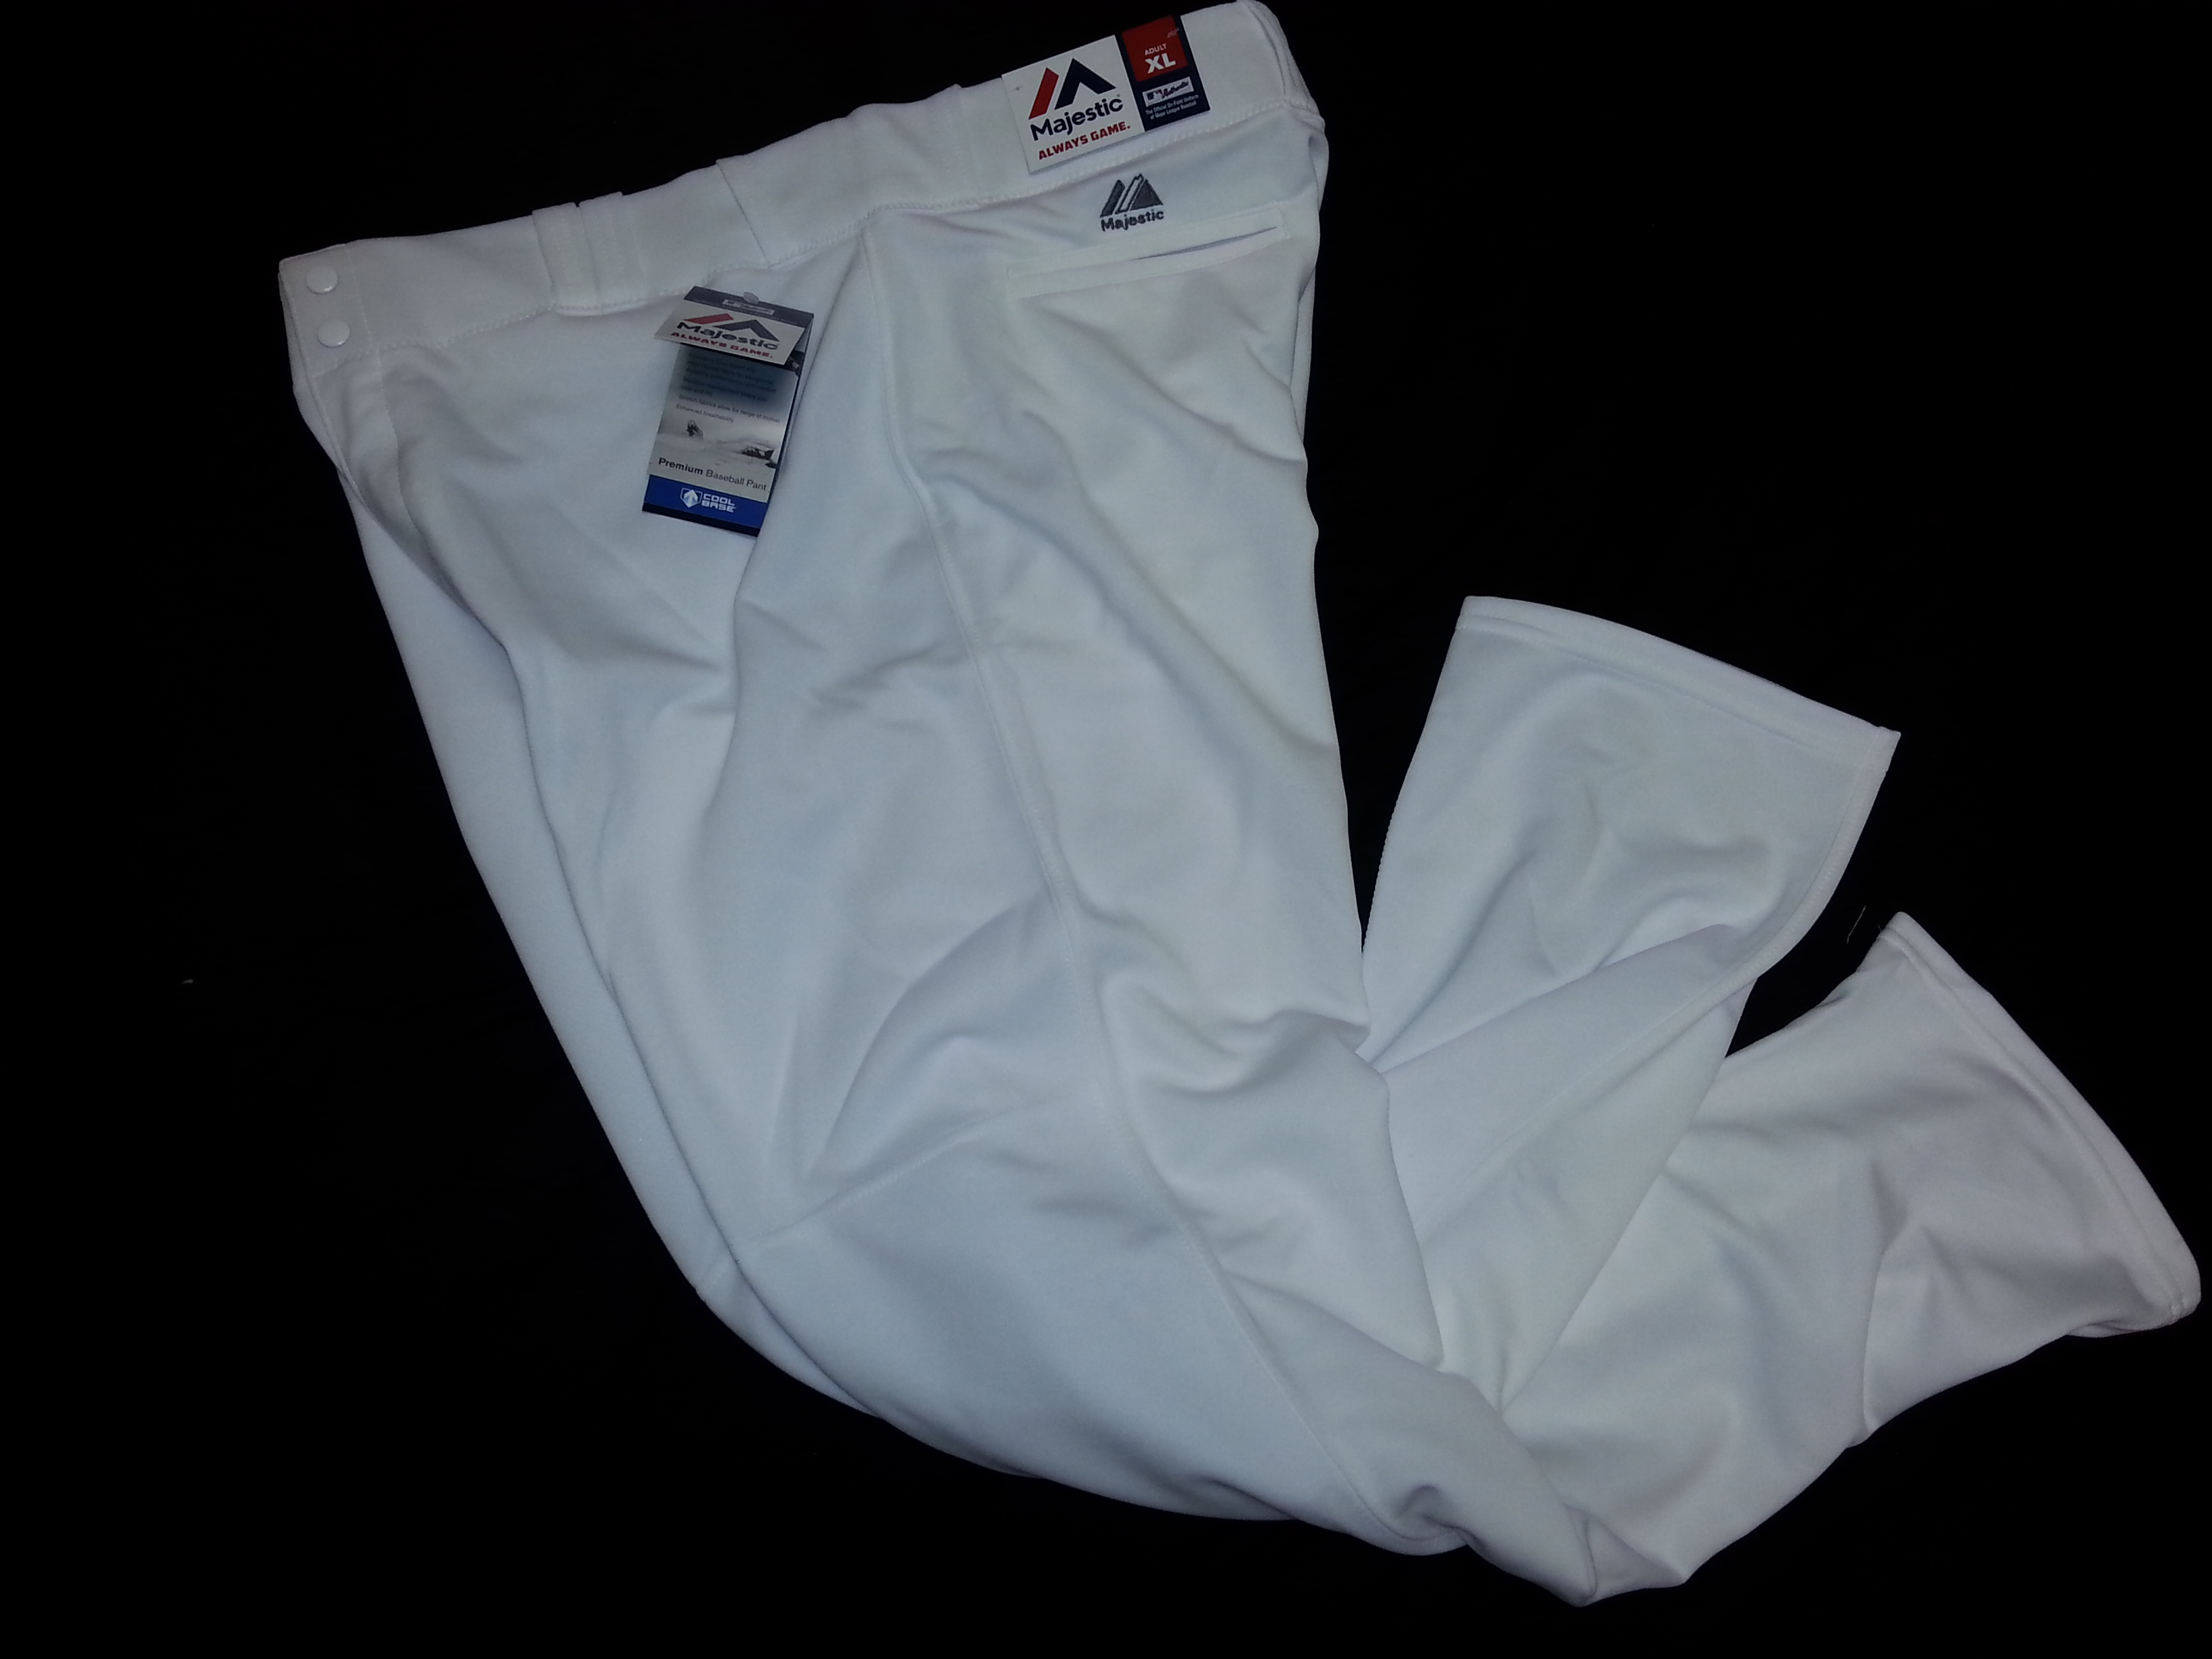 Details about   Majestic 8070 Pro Style Piped Mens Baseball Pants White/Green Size X-Large 